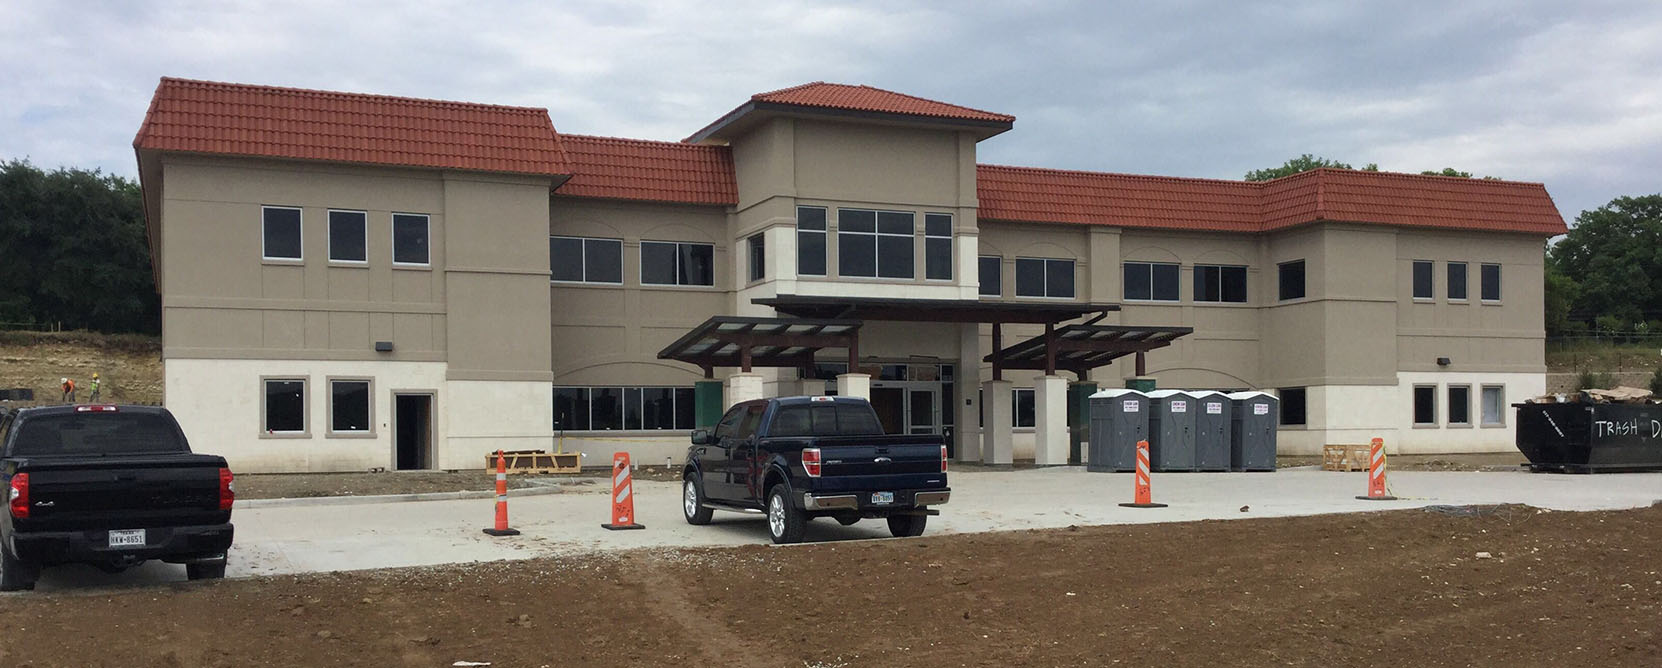 Construction of the North Texas Area Community Health Center